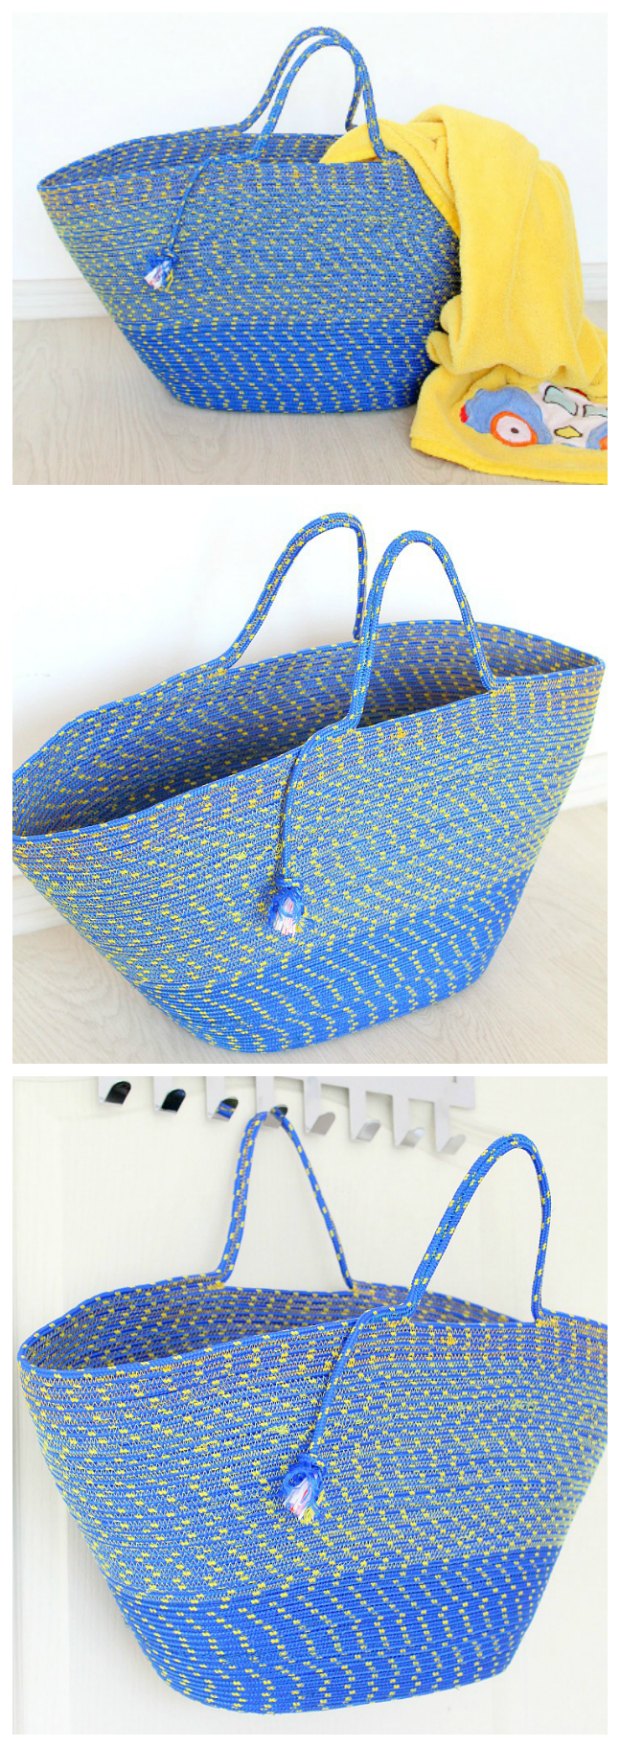 I couldn't believe it when I saw how this bag was made - just from a piece of rope! It's ingenious. Makes great beach and grocery bags. I'm making one for my mom too.